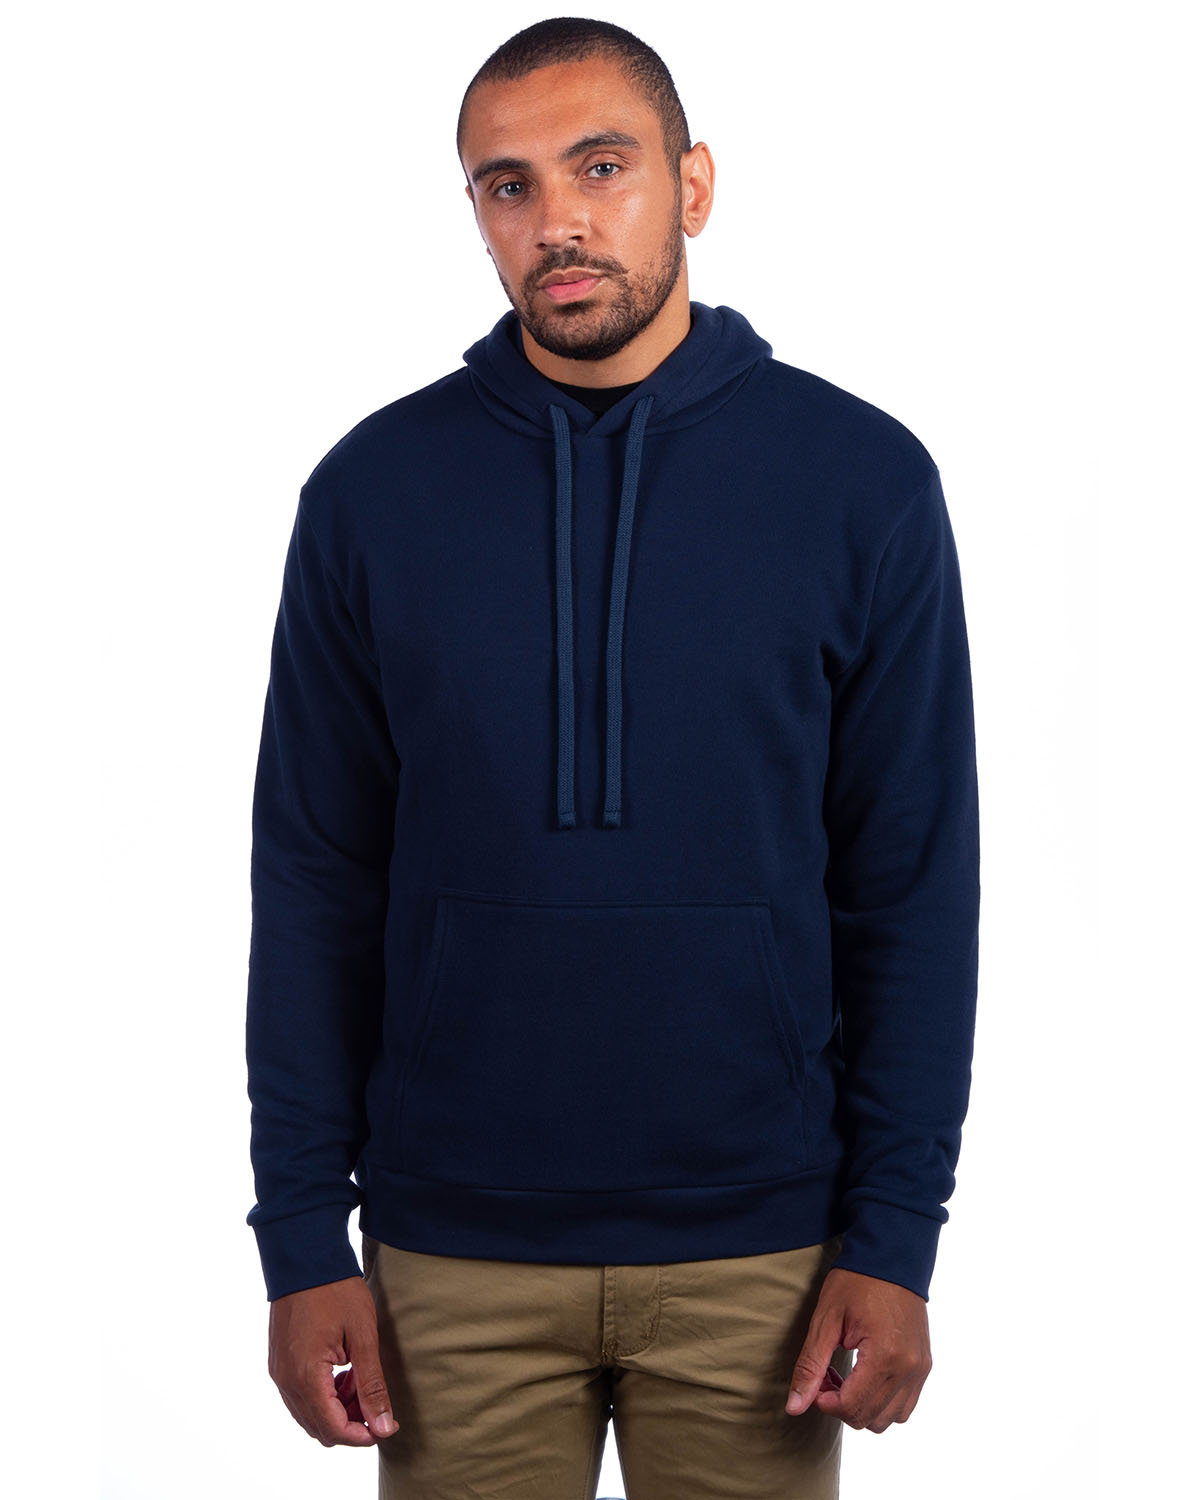 Next Level Adult Sueded French Terry Pullover Sweatshirt MIDNIGHT NAVY 